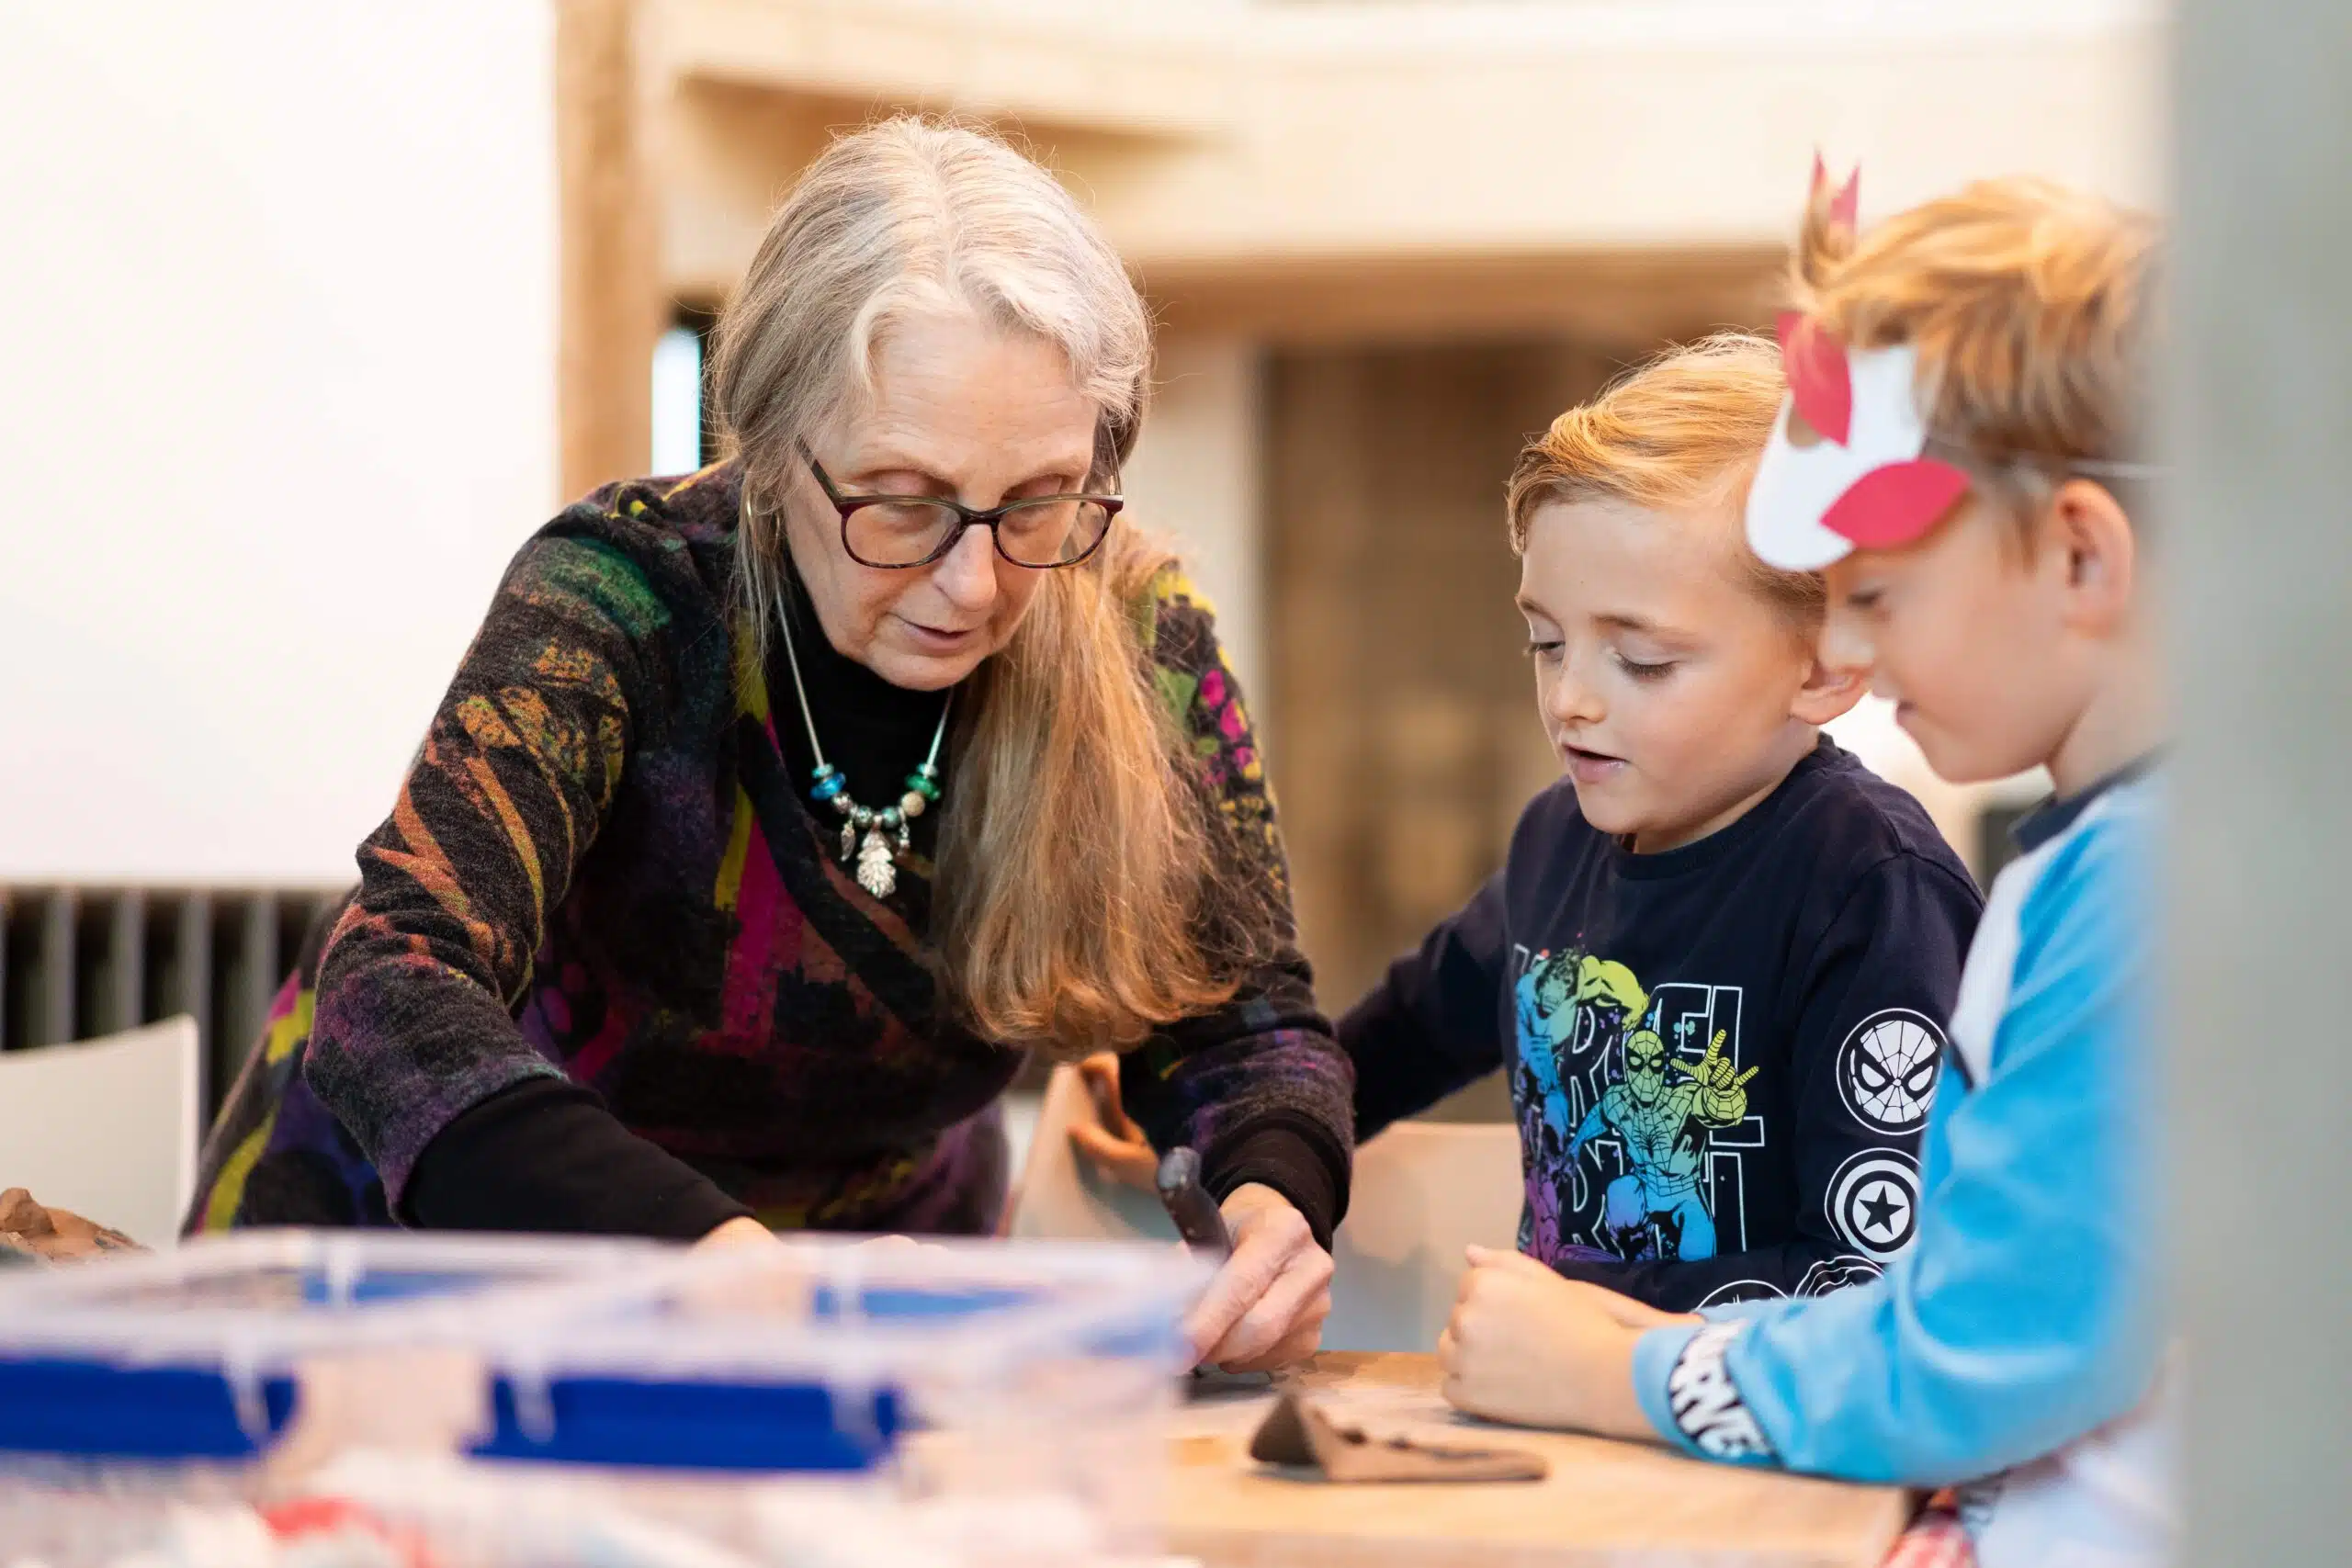 Education, stories and learning, Sudbury arts centre